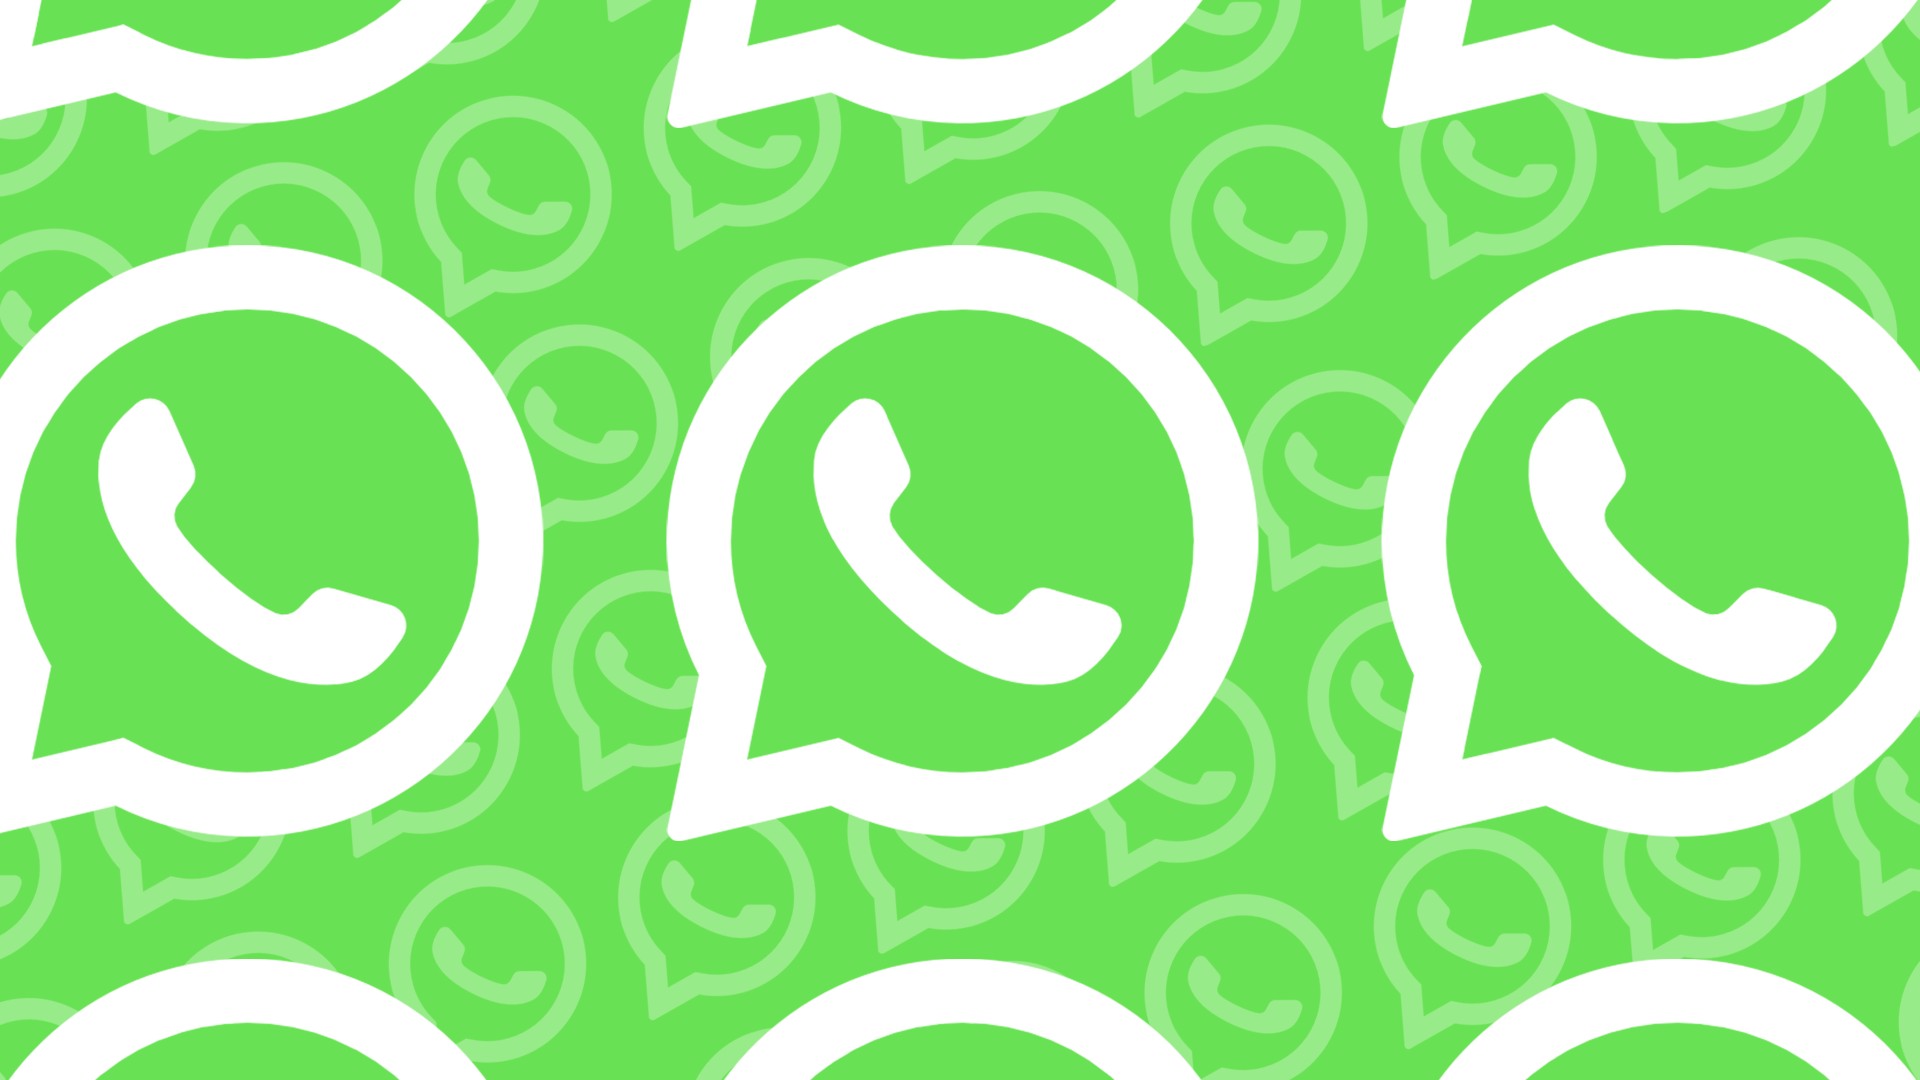 WhatsApp beta for iOS starts testing with option to edit messages
